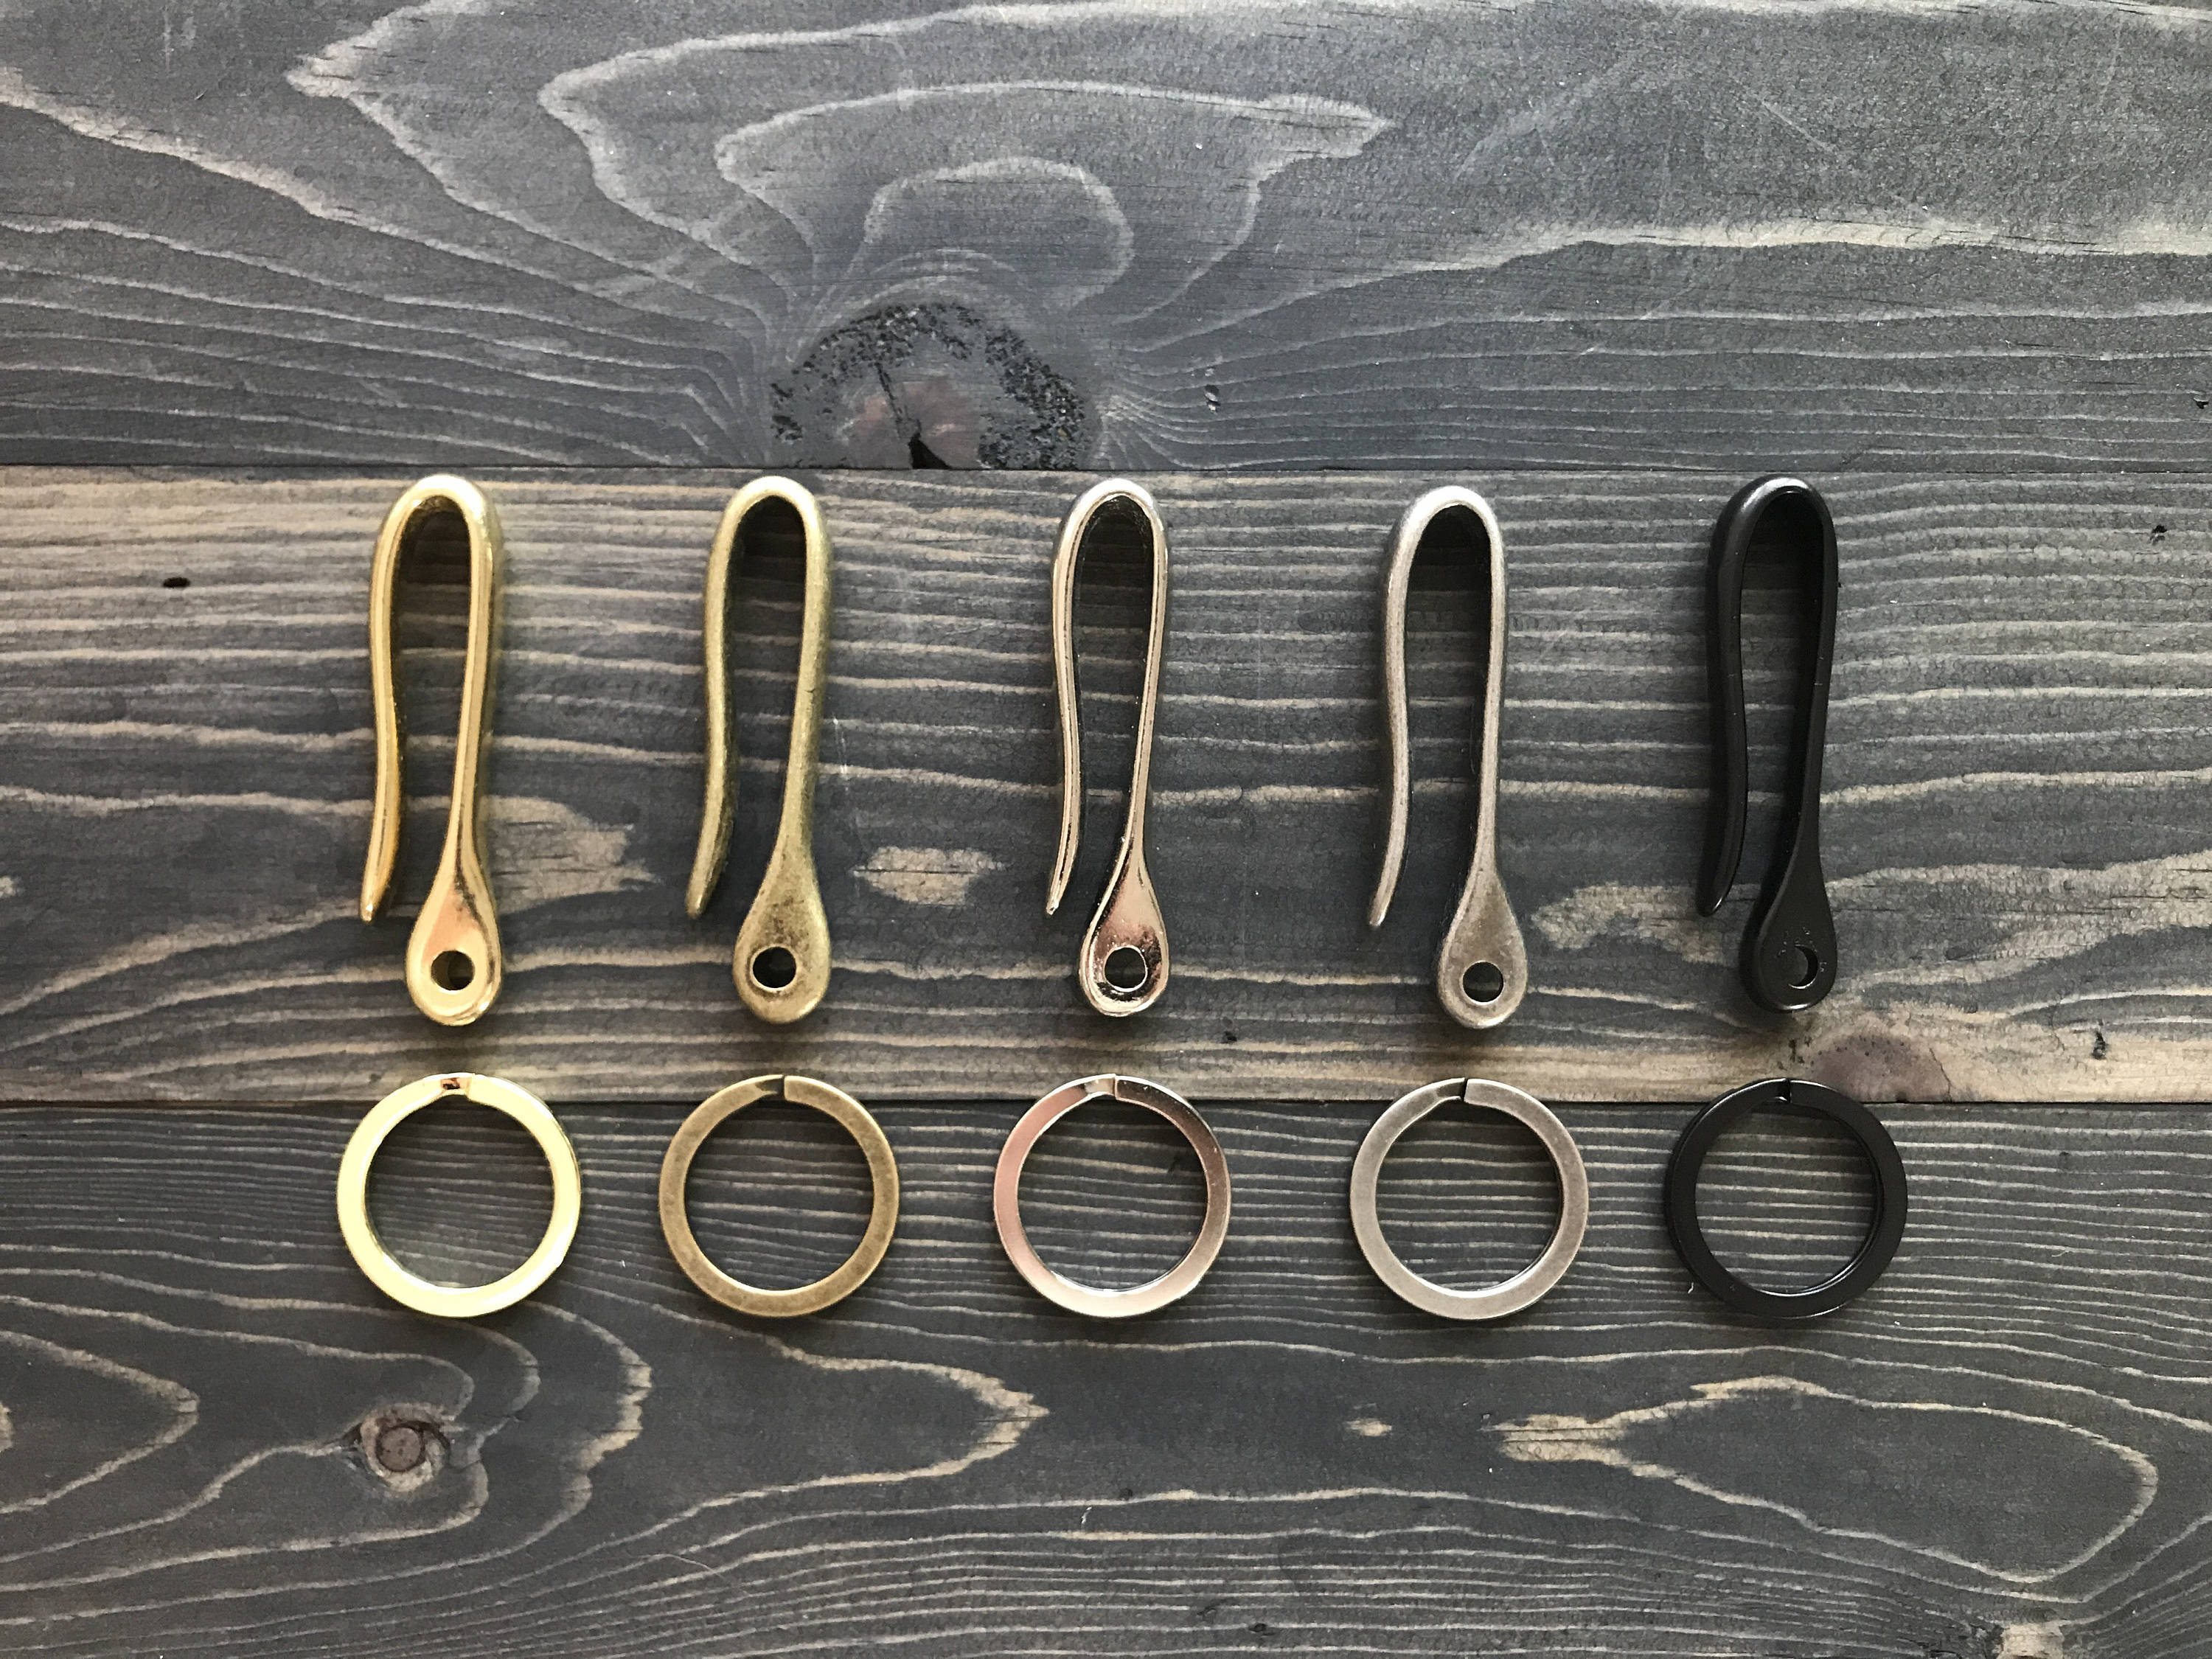 Antique Brass, Fish Hook Key Chain – Otych Goods Co. US Leather Workshop